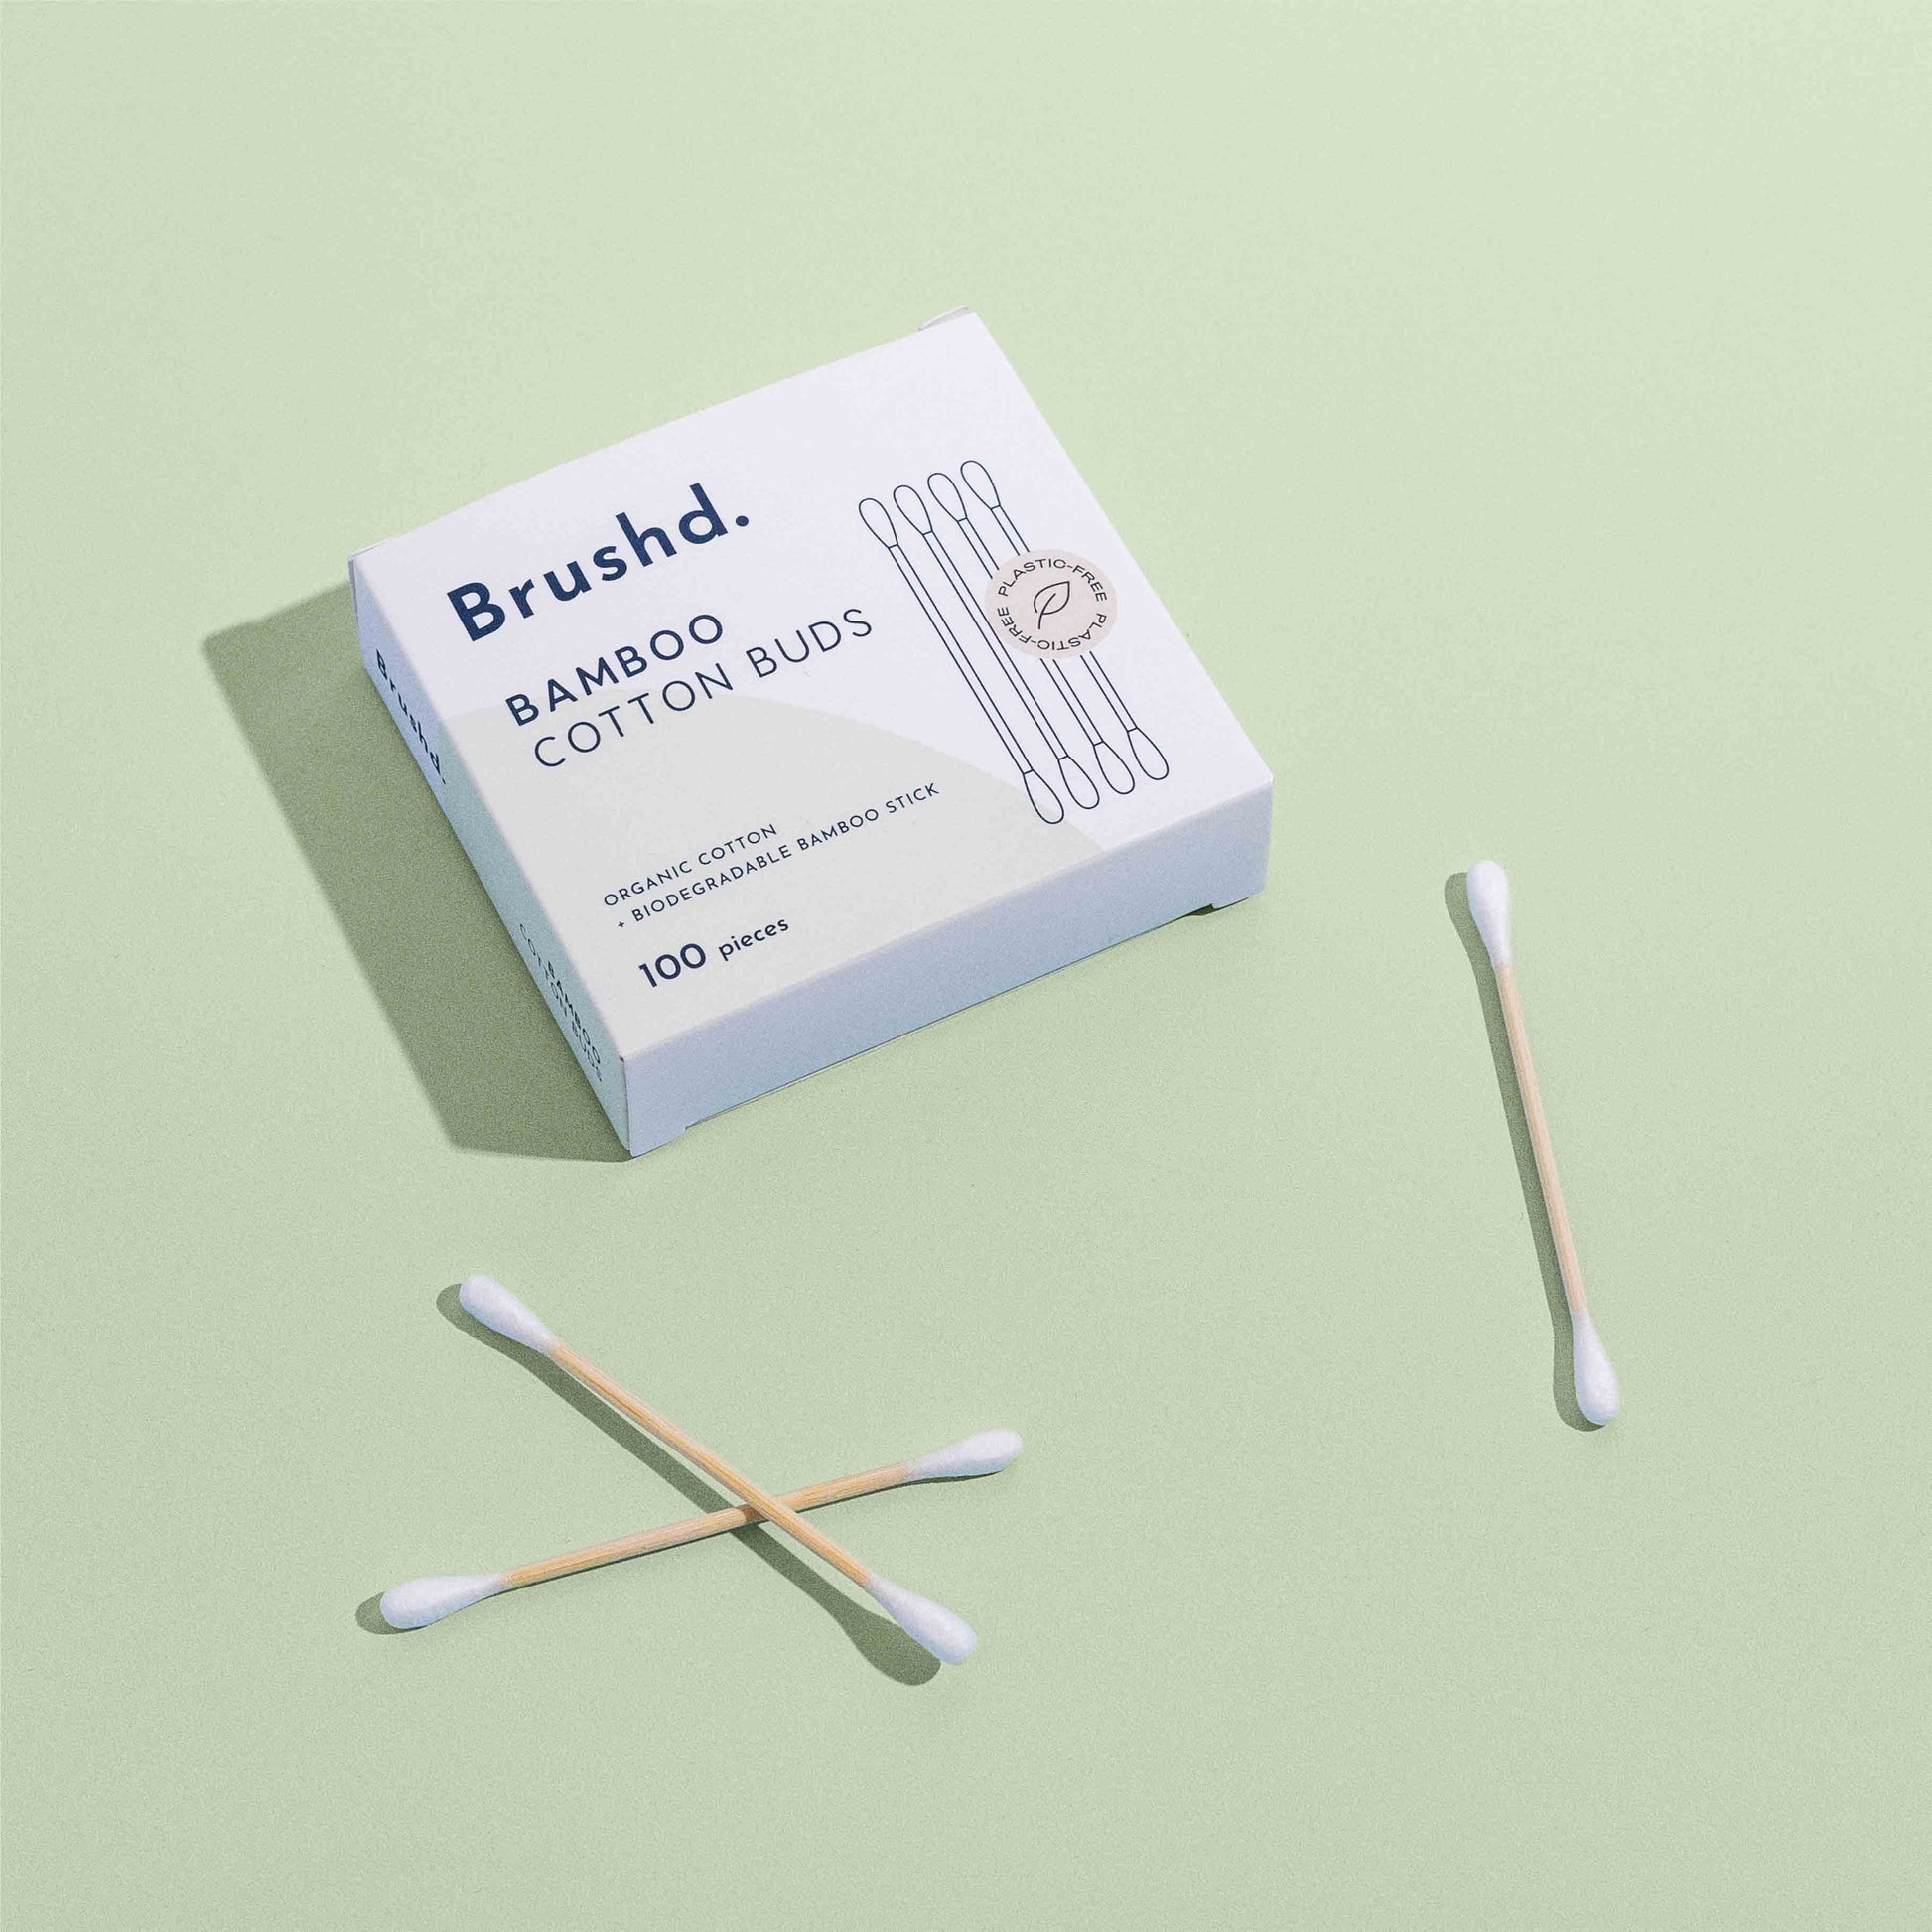 bamboo cotton buds by brushd on green background, birds eye view